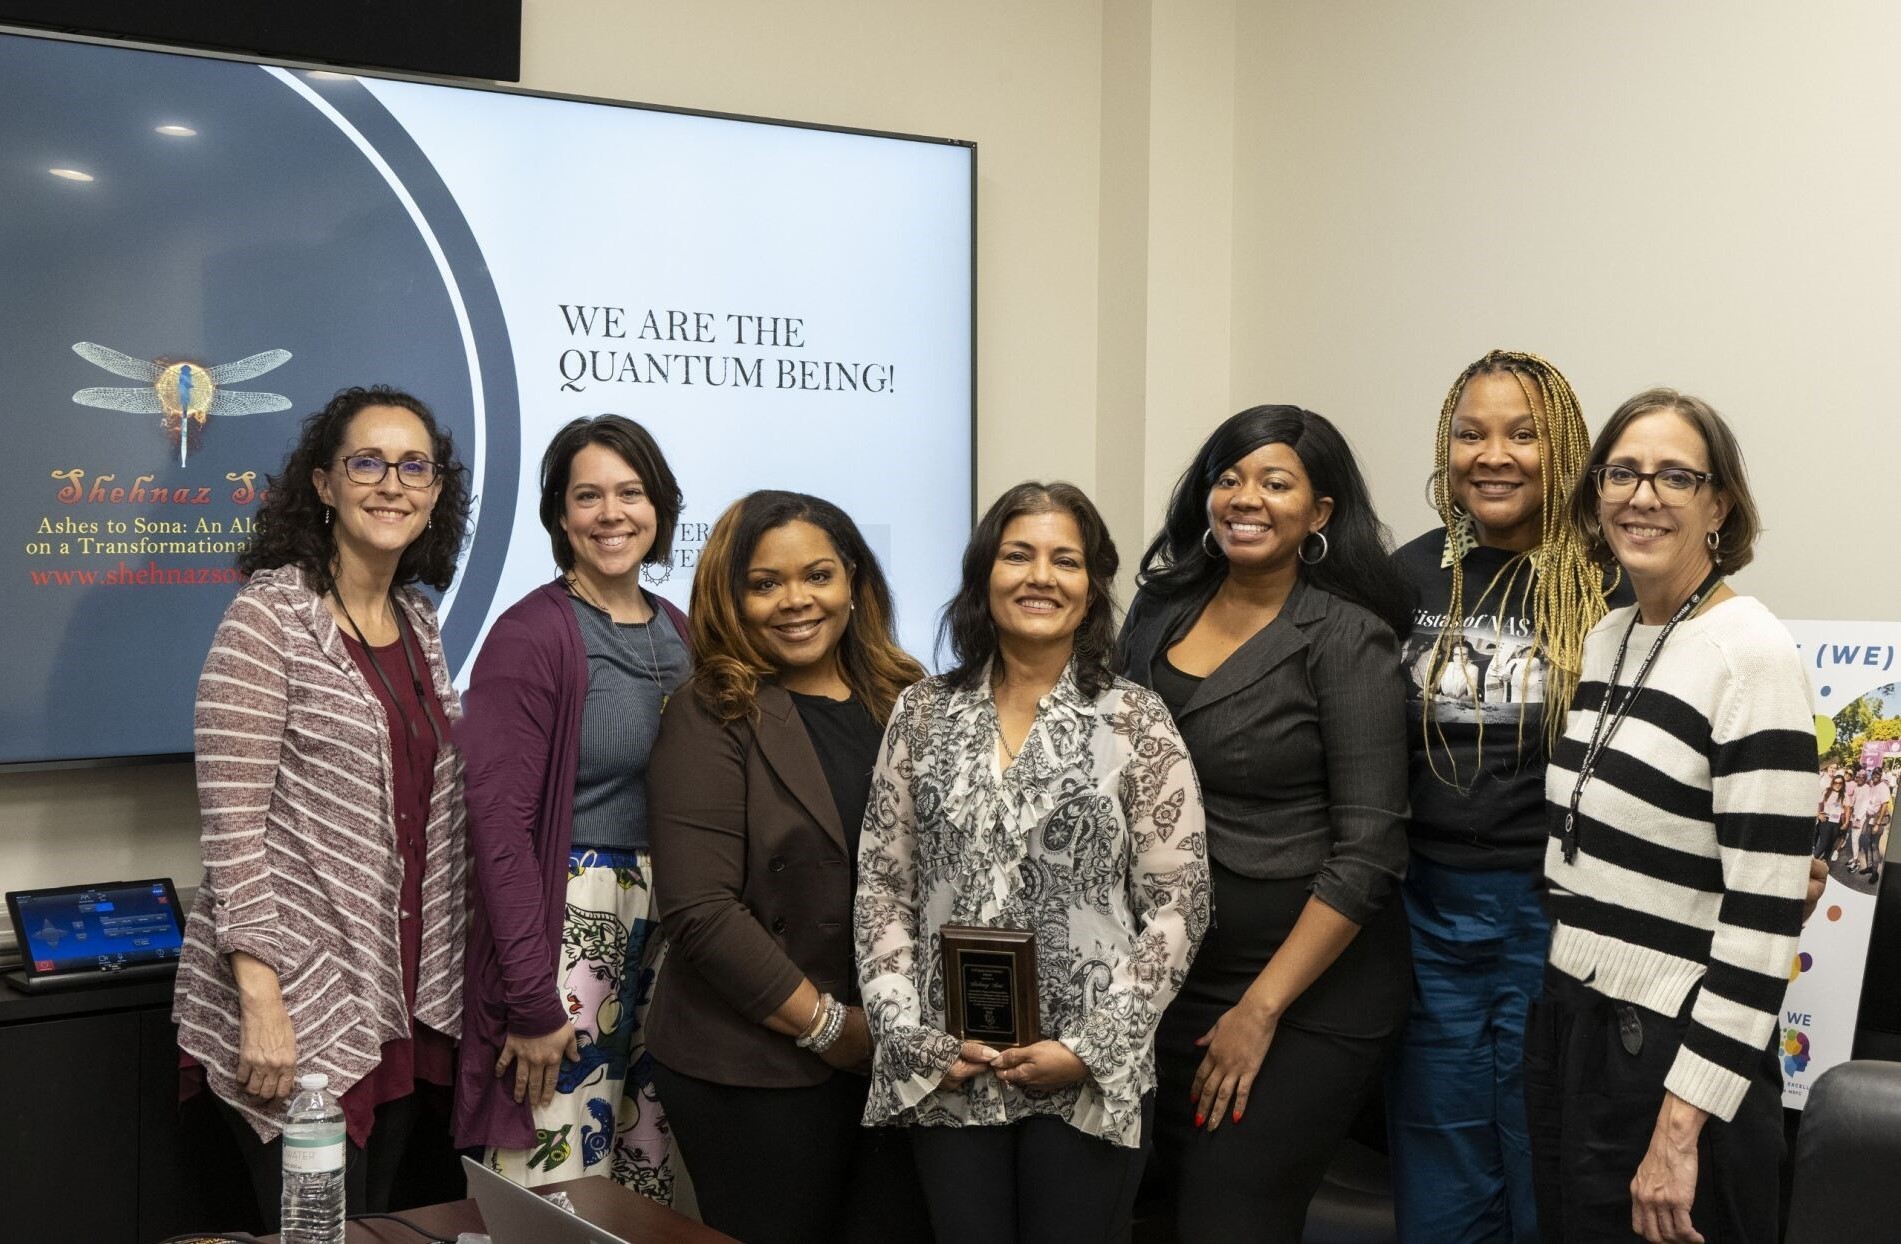 Shehnaz Soni, center, a NASA senior systems engineer, author, and speaker, smiles with Women of Excellence members following her March 18 presentation to the employee resource group at NASA’s Marshall Space Flight Center. The event was a part of Women’s History Month in March. From left are Kristina Honeycutt, Leah Varner, Denise Smithers, Soni, LaBreesha Batey, Aquita Wherry, and Anastasia Byler.